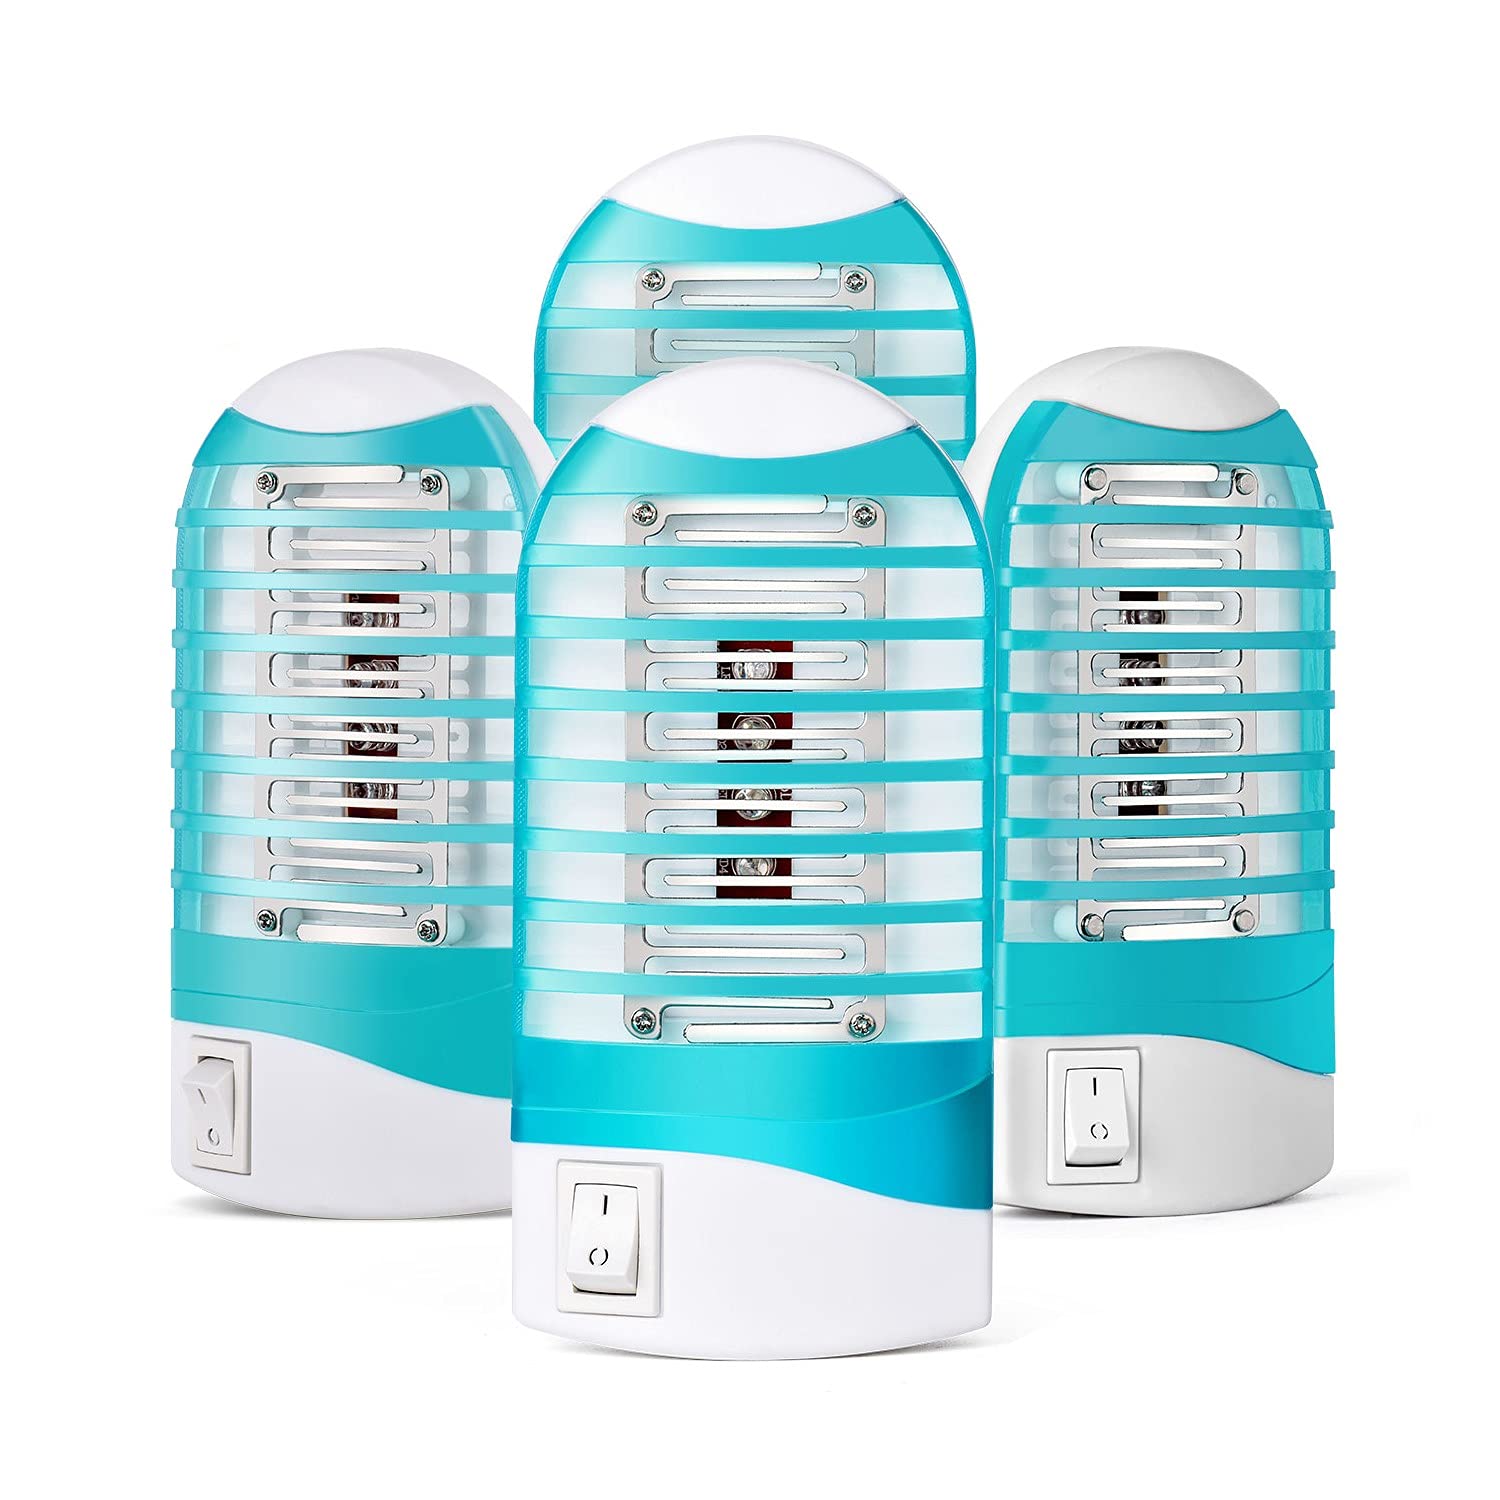 Flying Insect Trap Plug-In Upgrade Mosquito Trap Gnat Killer